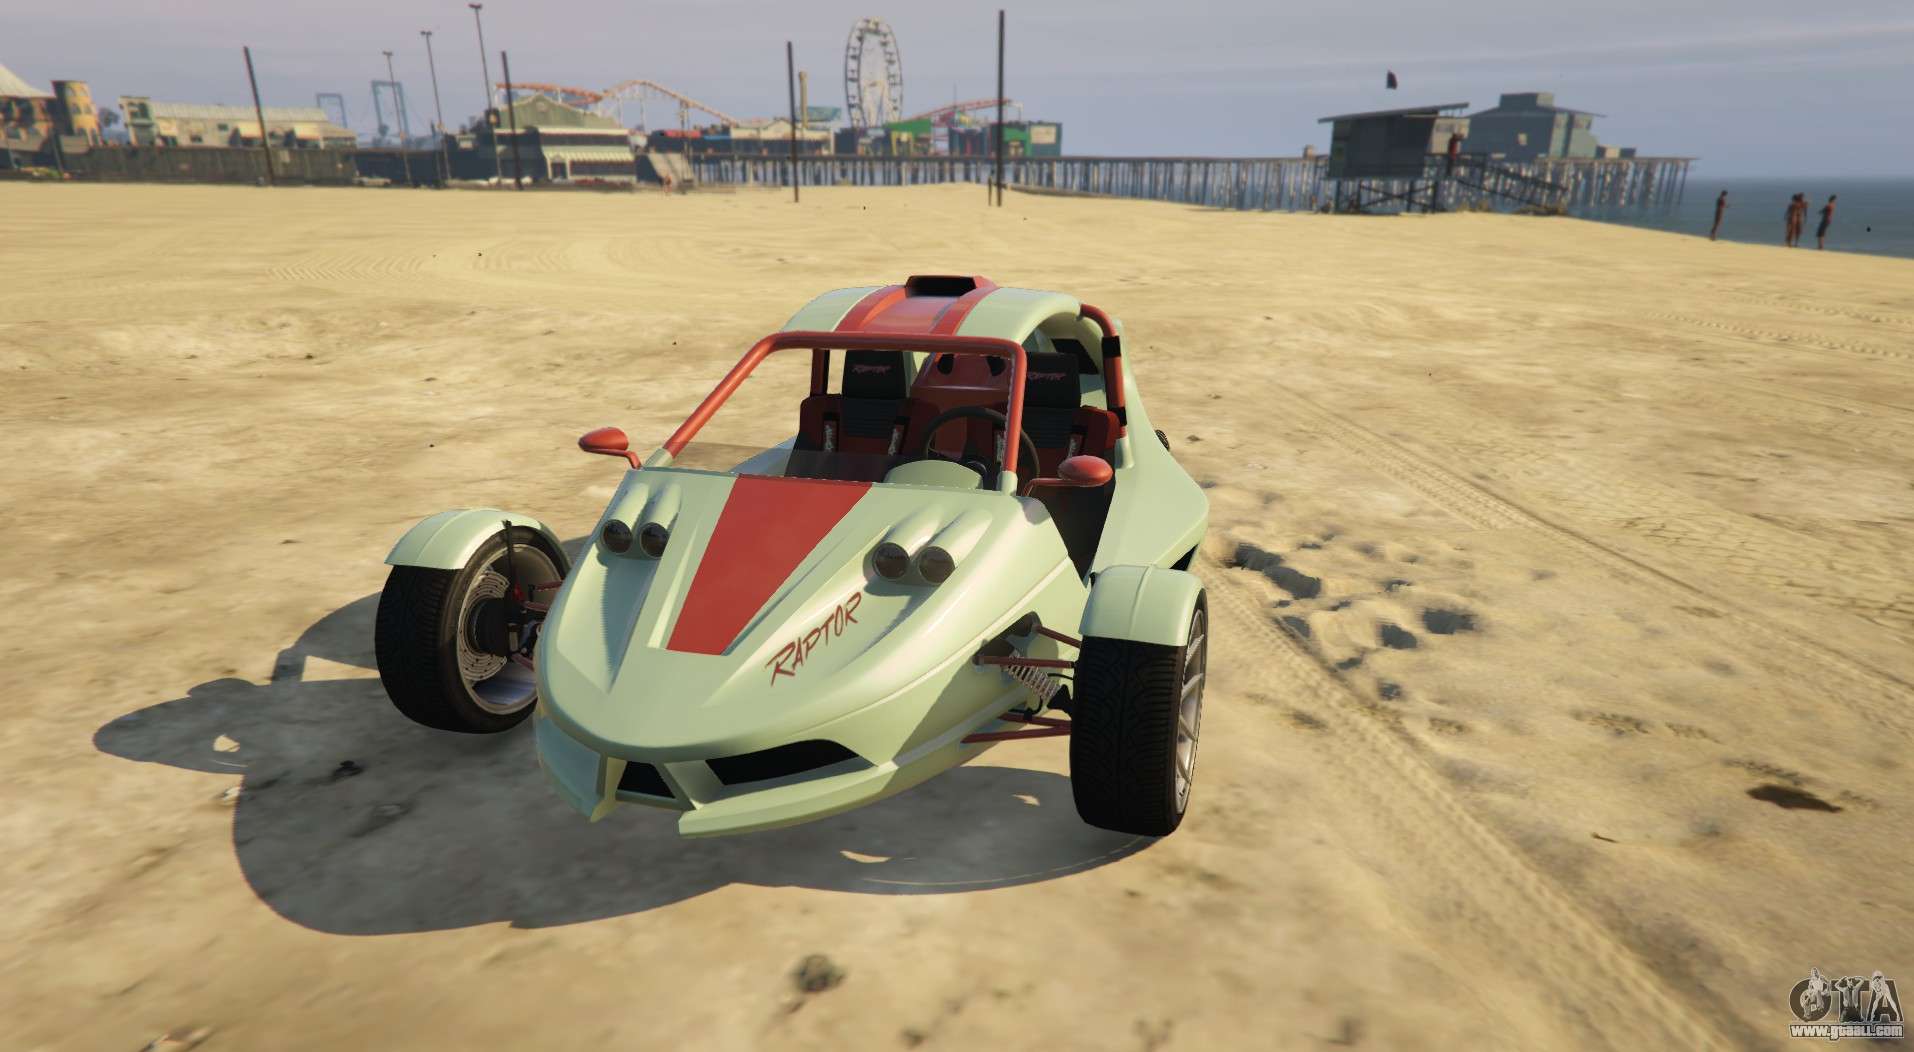 Original tricycle from GTA 5 BF Raptor